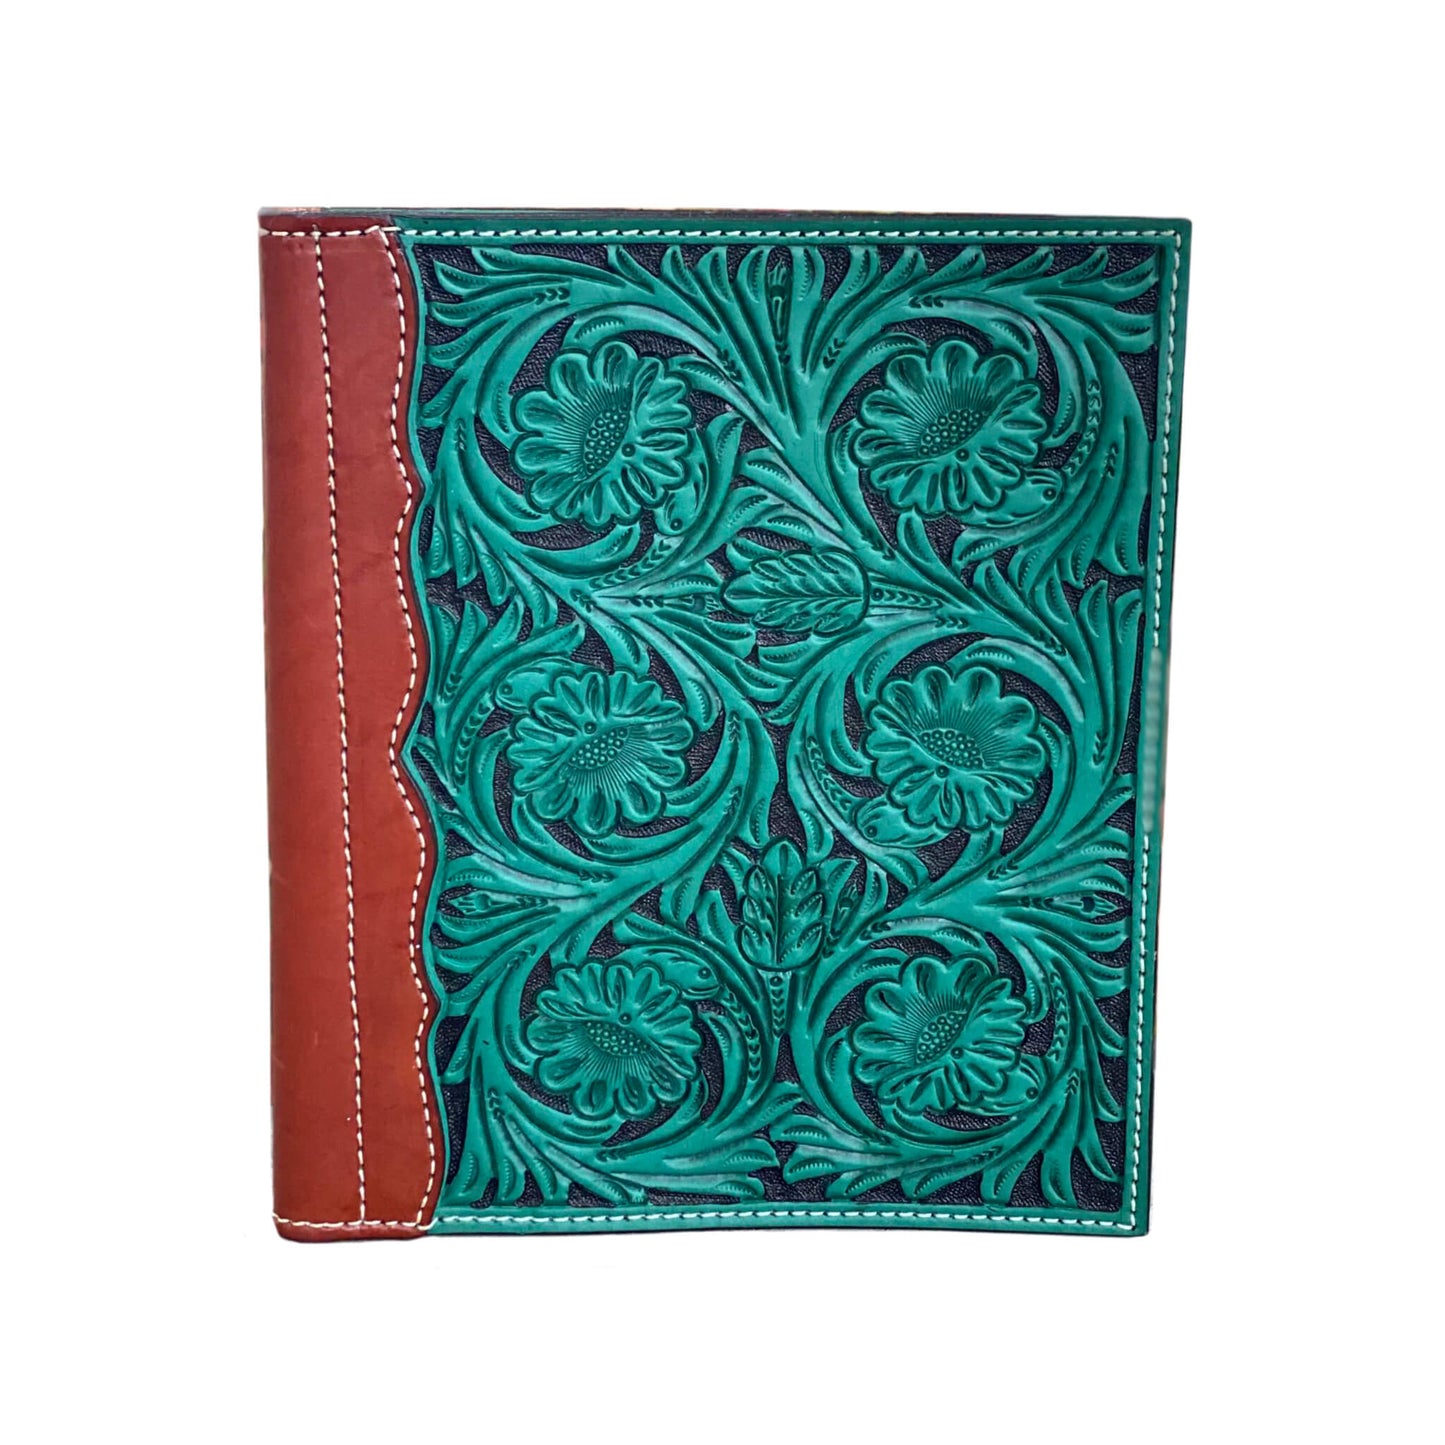 Large portfolio turquoise leather floral tooling with background paint